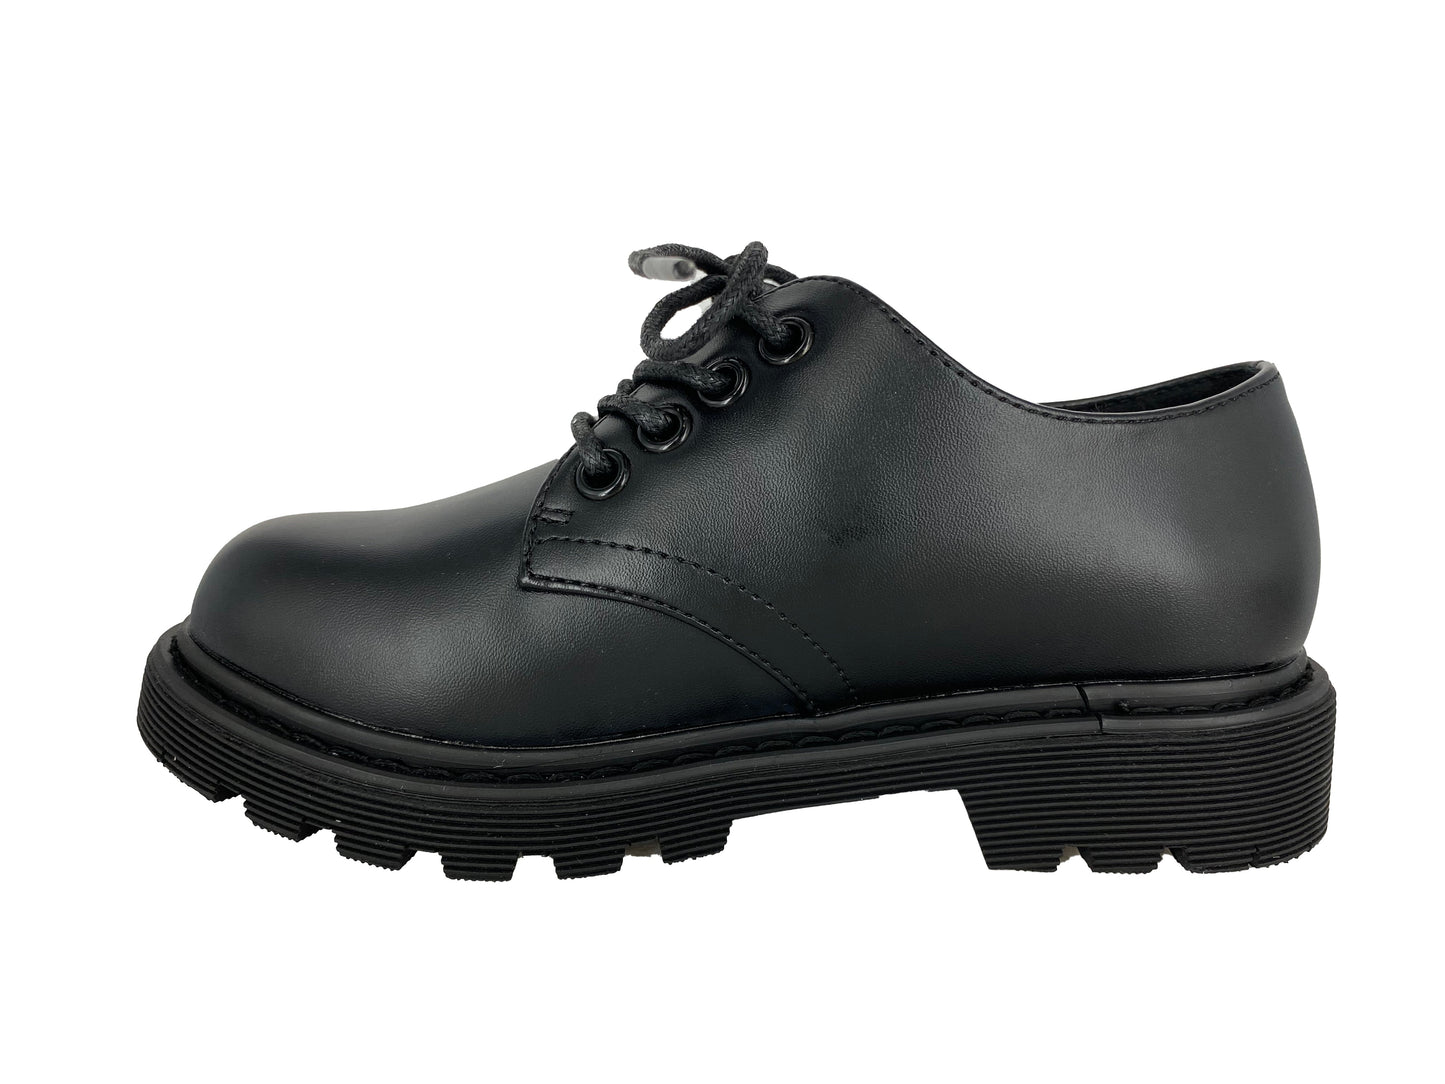 Gotta Flurt Girl's Academy Black Synthetic Leather Oxford Student Shoes